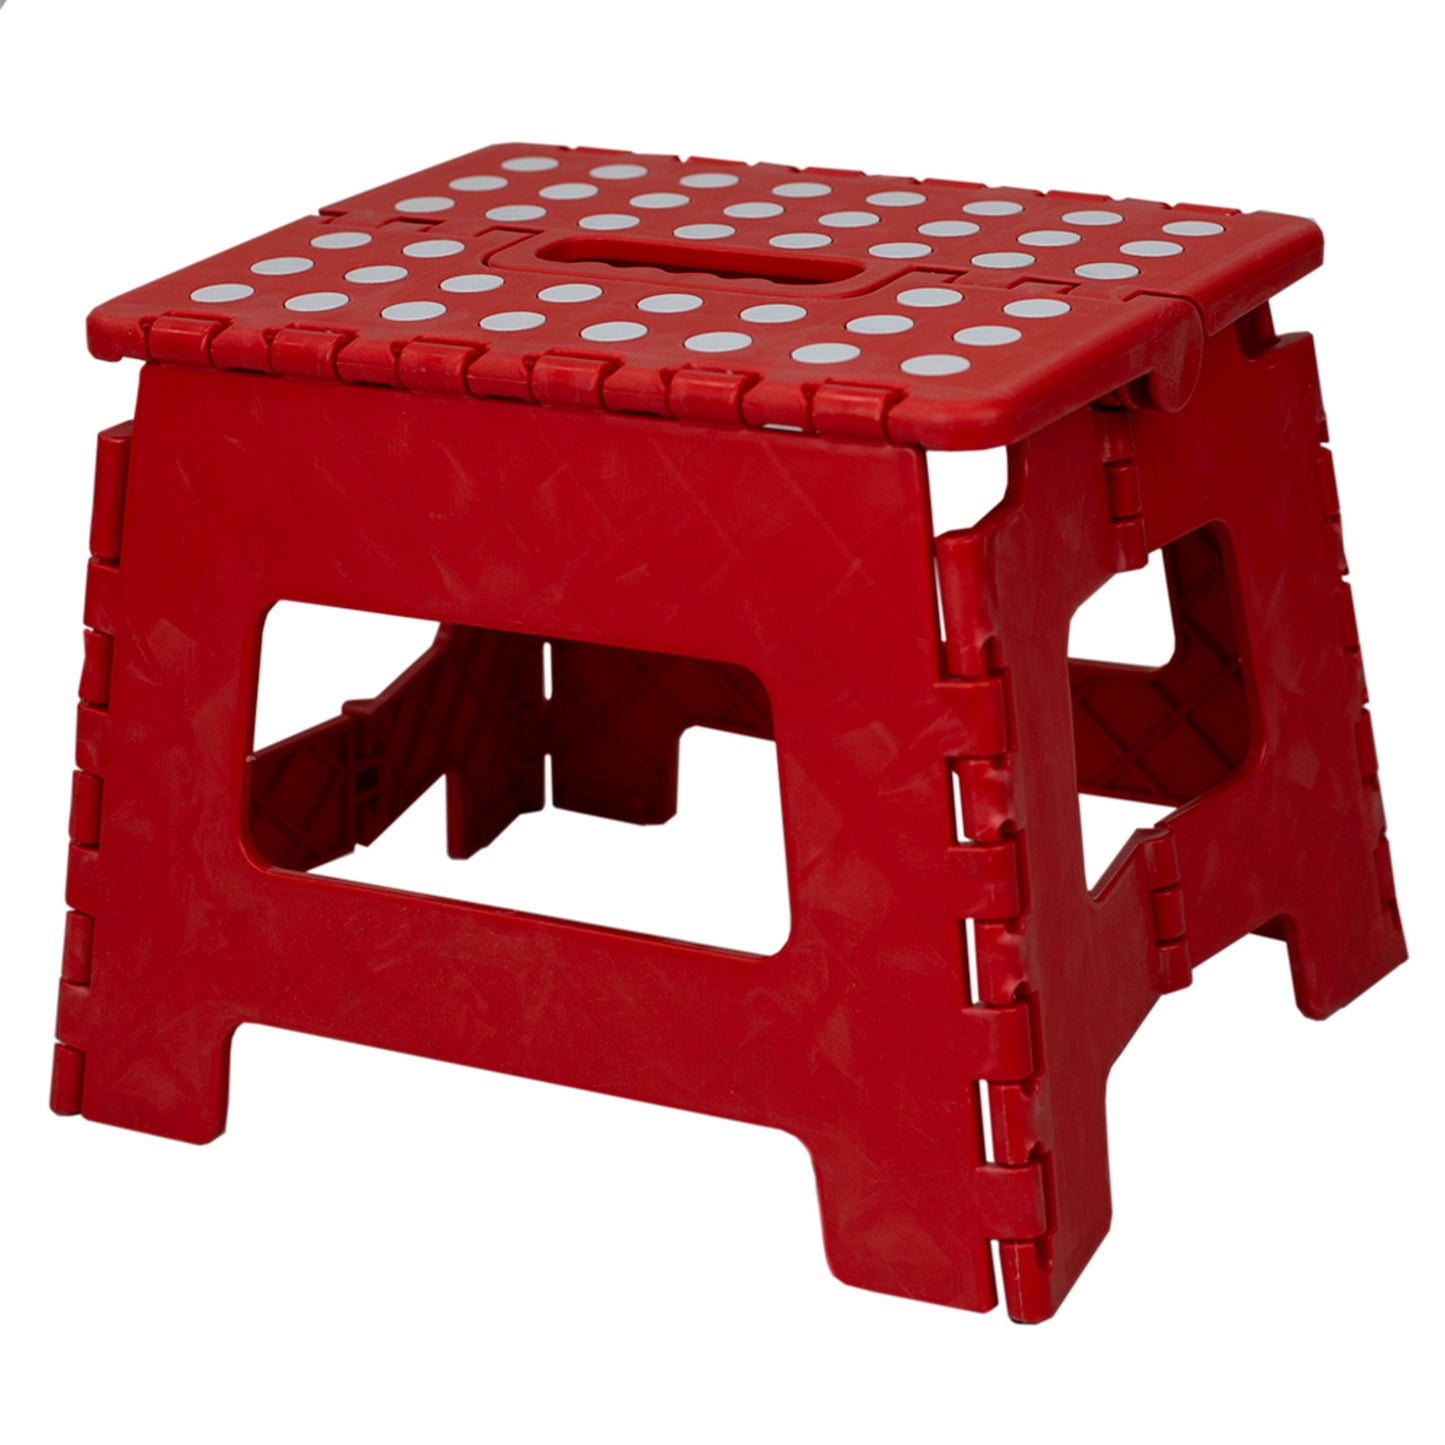 Home Basics Small  Plastic Folding Stool with Non-Slip Dots, Red - Red